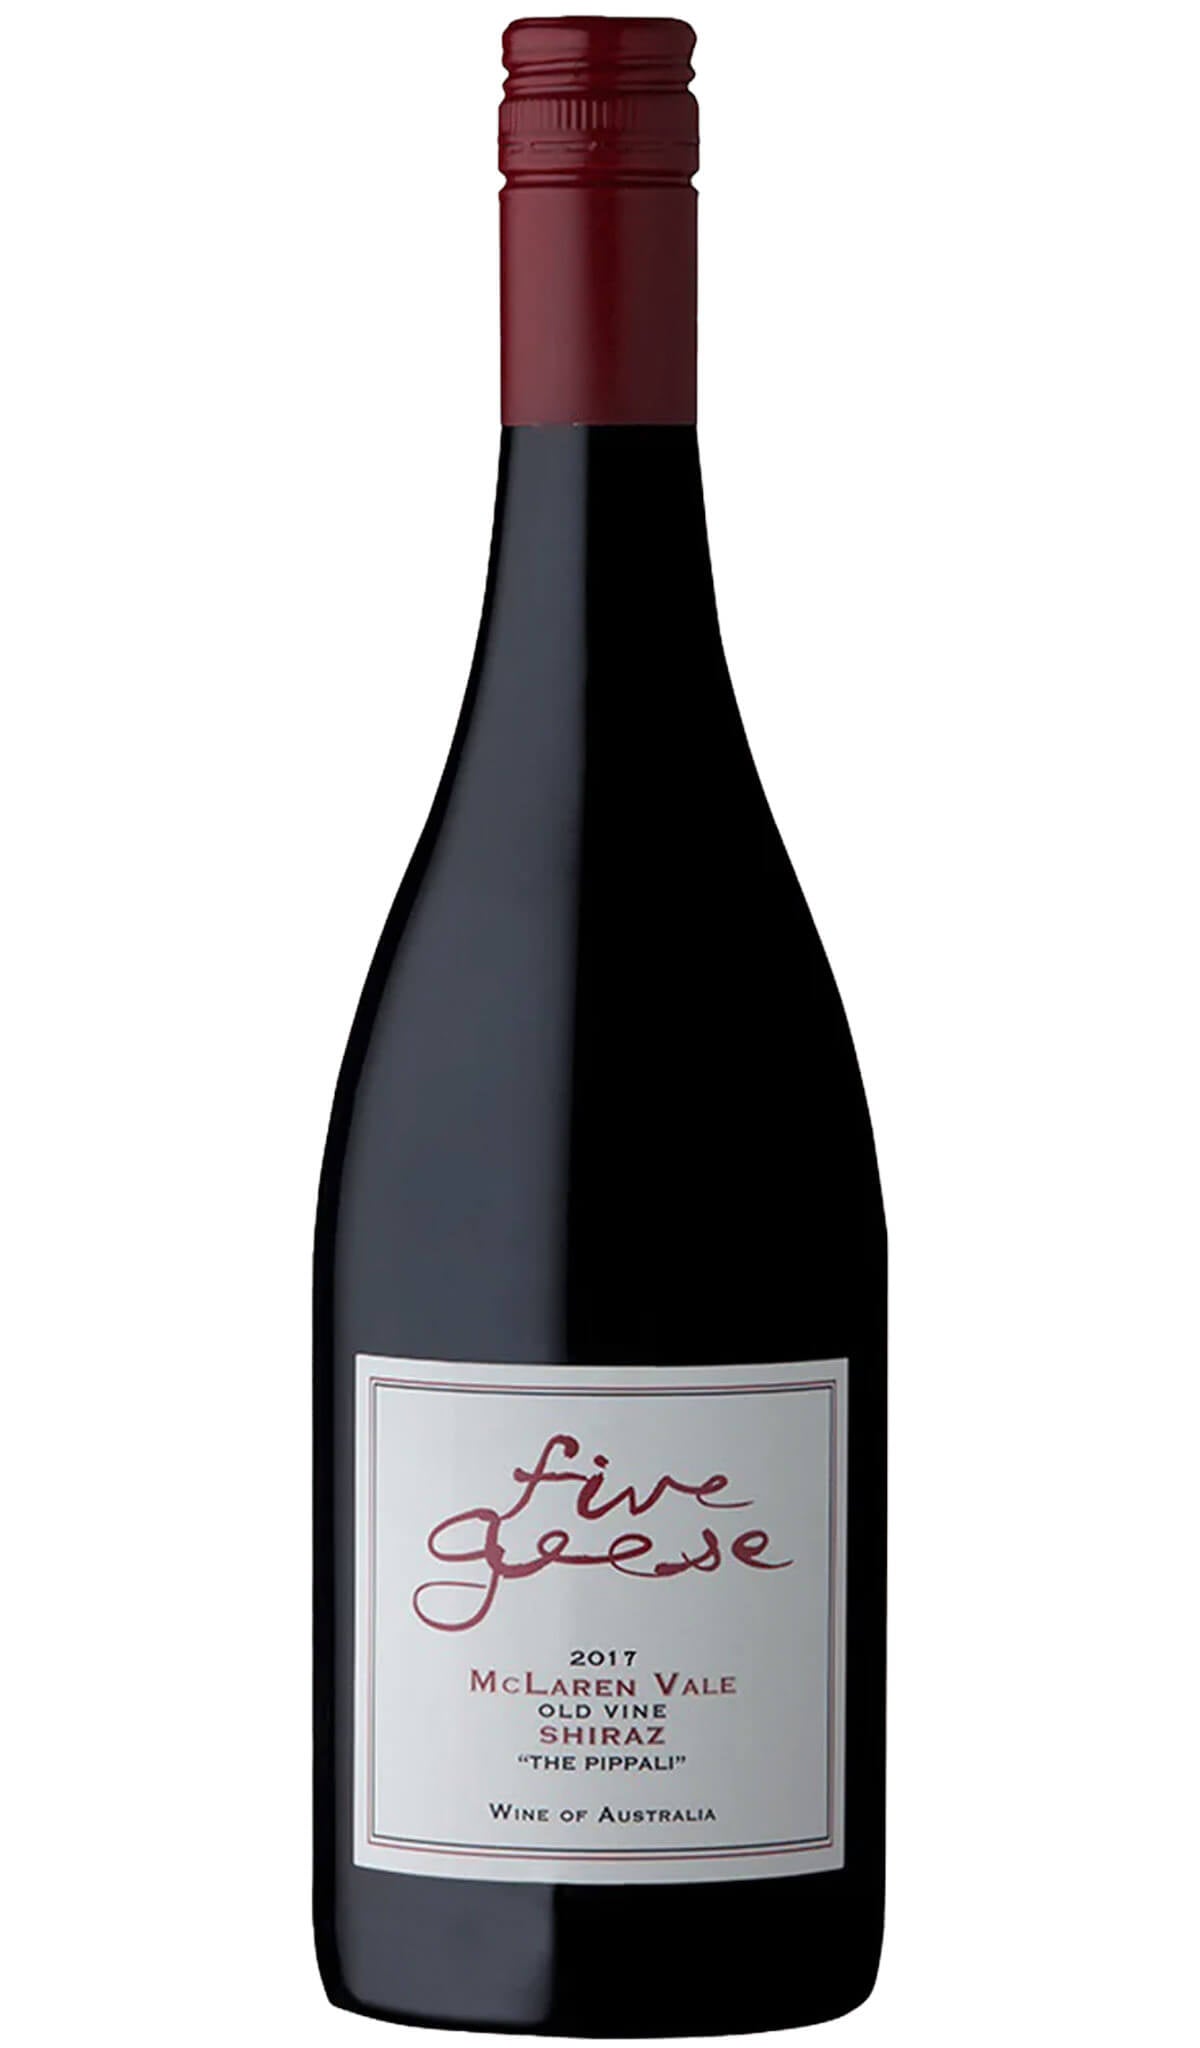 Find out more, explore the range and purchase Five Geese Old Vine The Pippali Shiraz 2017 (McLaren Vale) available online at Wine Sellers Direct - Australia'a independent liquor specialists.